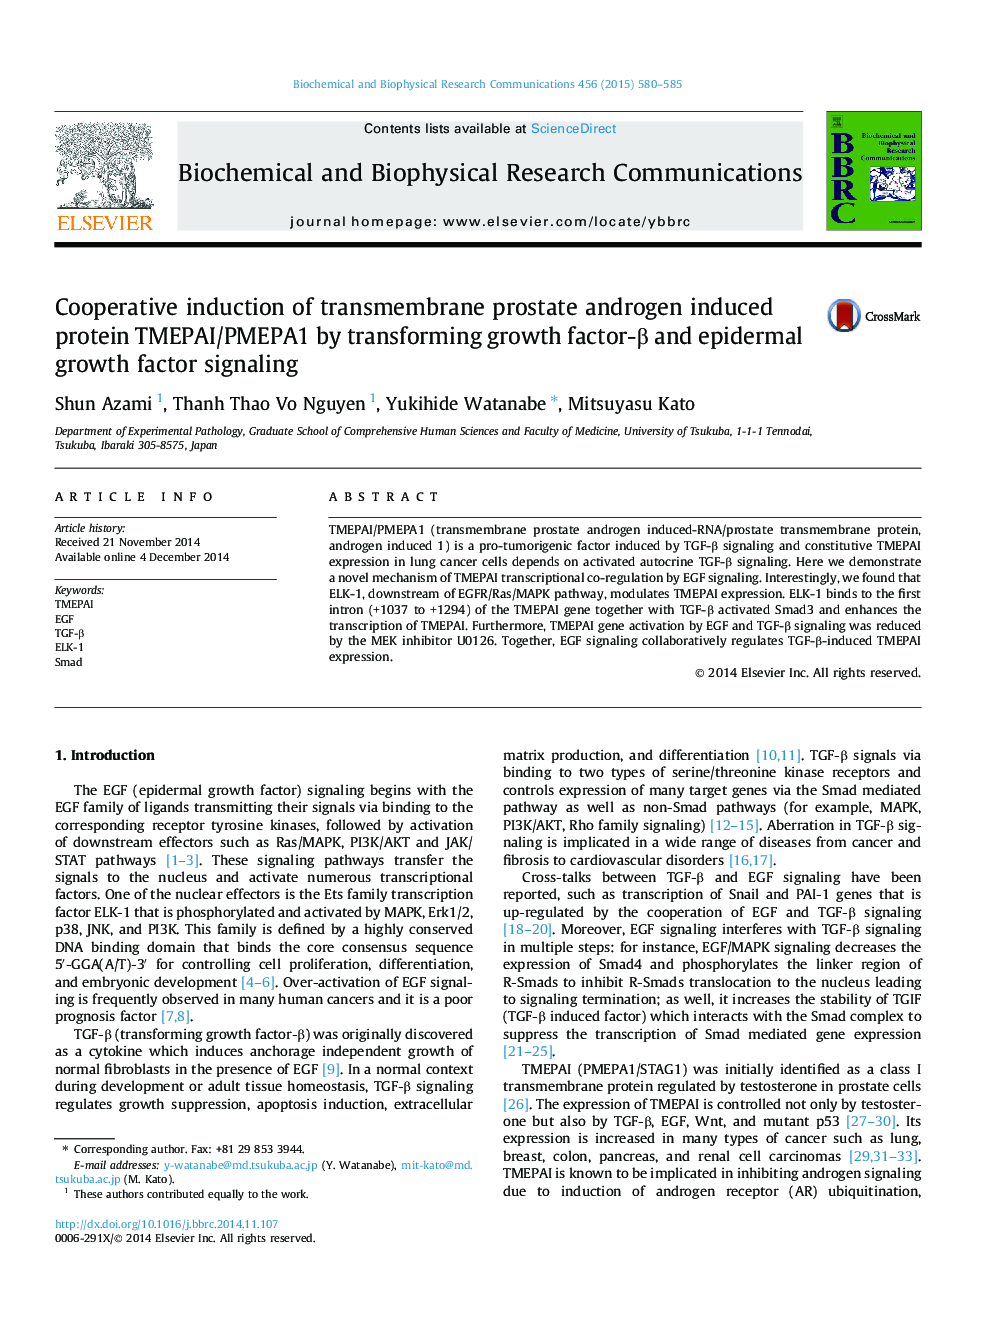 Cooperative induction of transmembrane prostate androgen induced protein TMEPAI/PMEPA1 by transforming growth factor-β and epidermal growth factor signaling